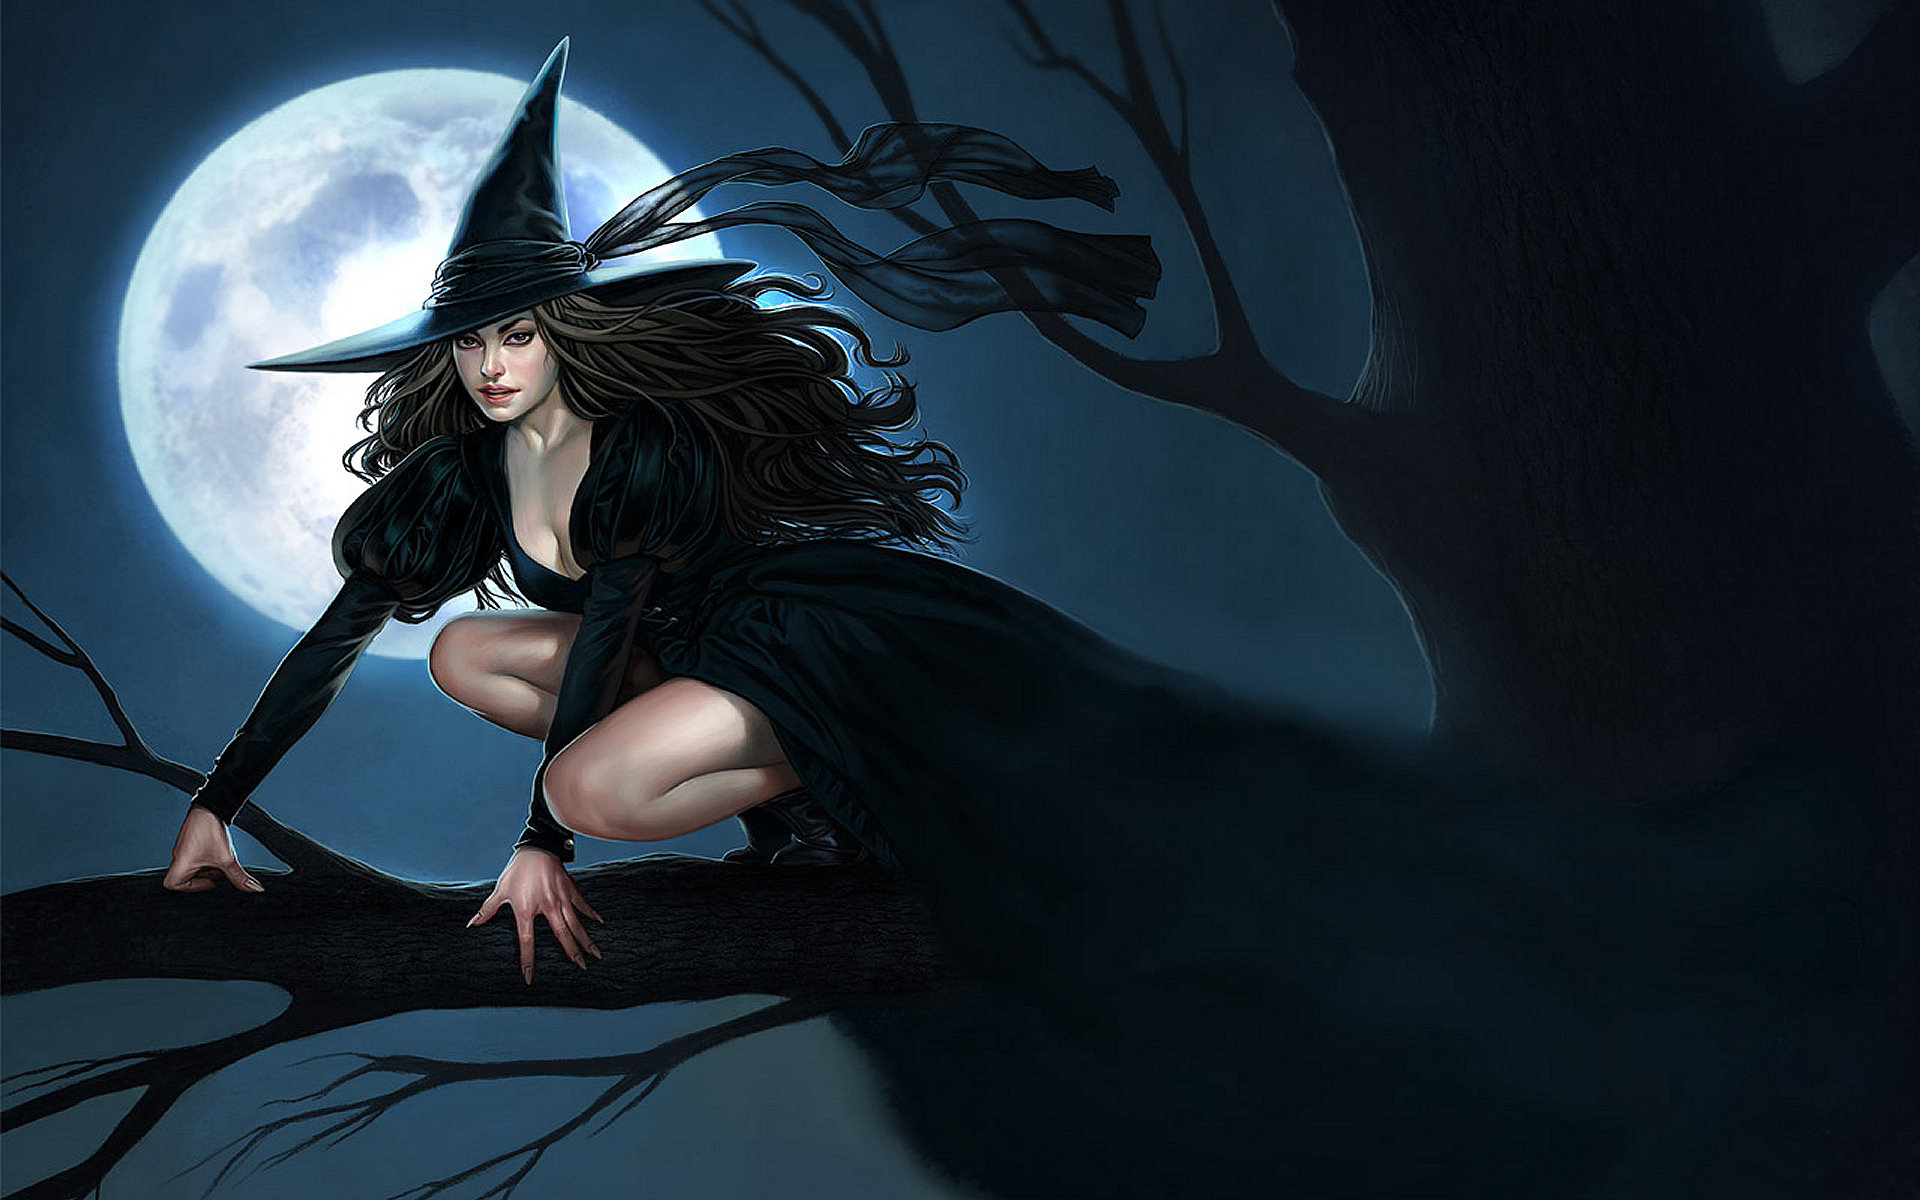 Witch Computer Wallpapers Desktop Backgrounds 1920x1200 ID194989 1920x1200